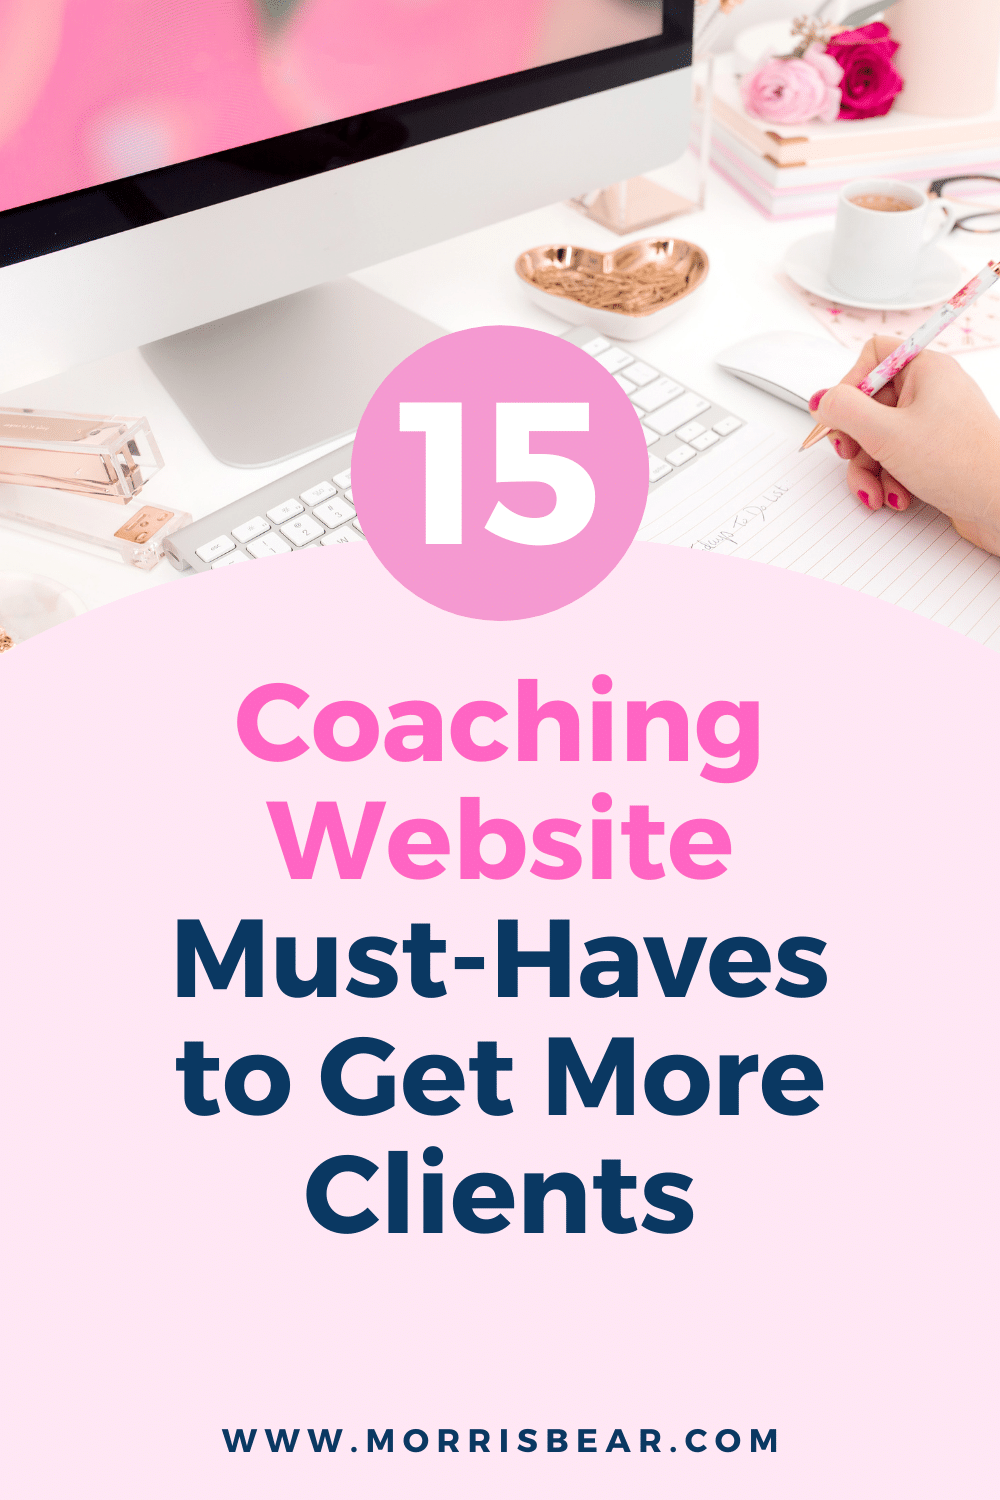 15 Features for a high converting coaching website - diy your website